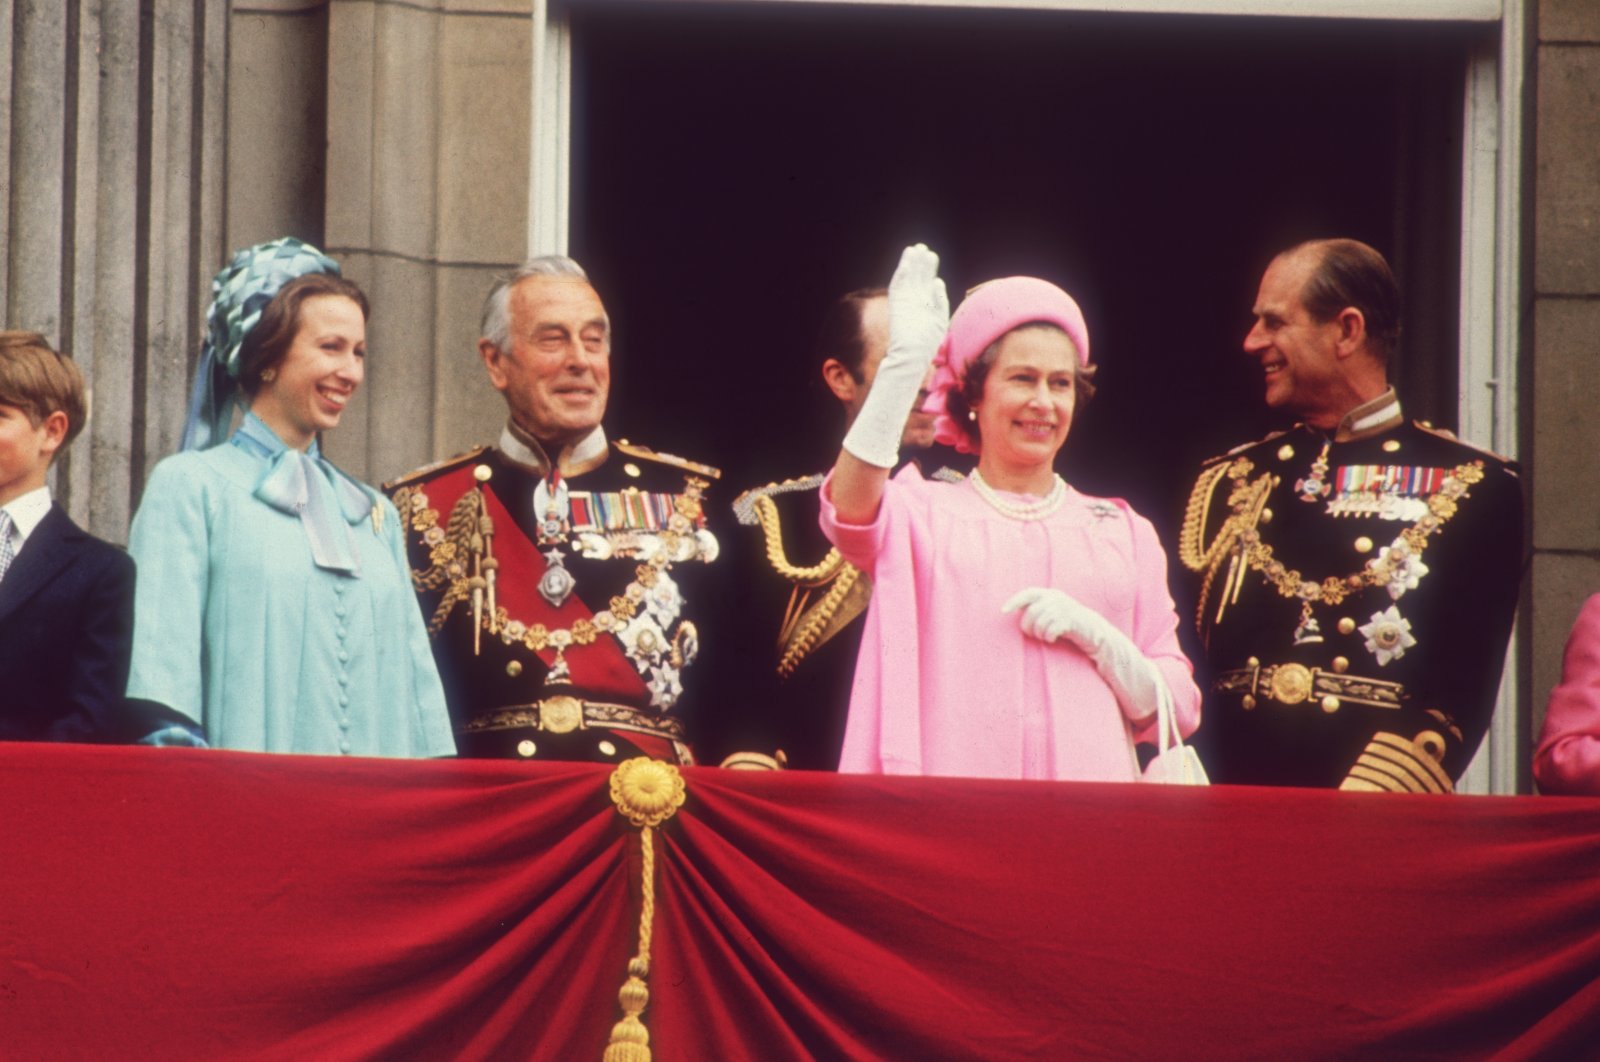 Queen Elizabeth II with Princess Anne, Earl Mountbatten and the Duke of Edinburgh on the balcony of Buckingham Palace, London, U.K., 28th June 1977. (Photo by Fox Photos/Getty Images)